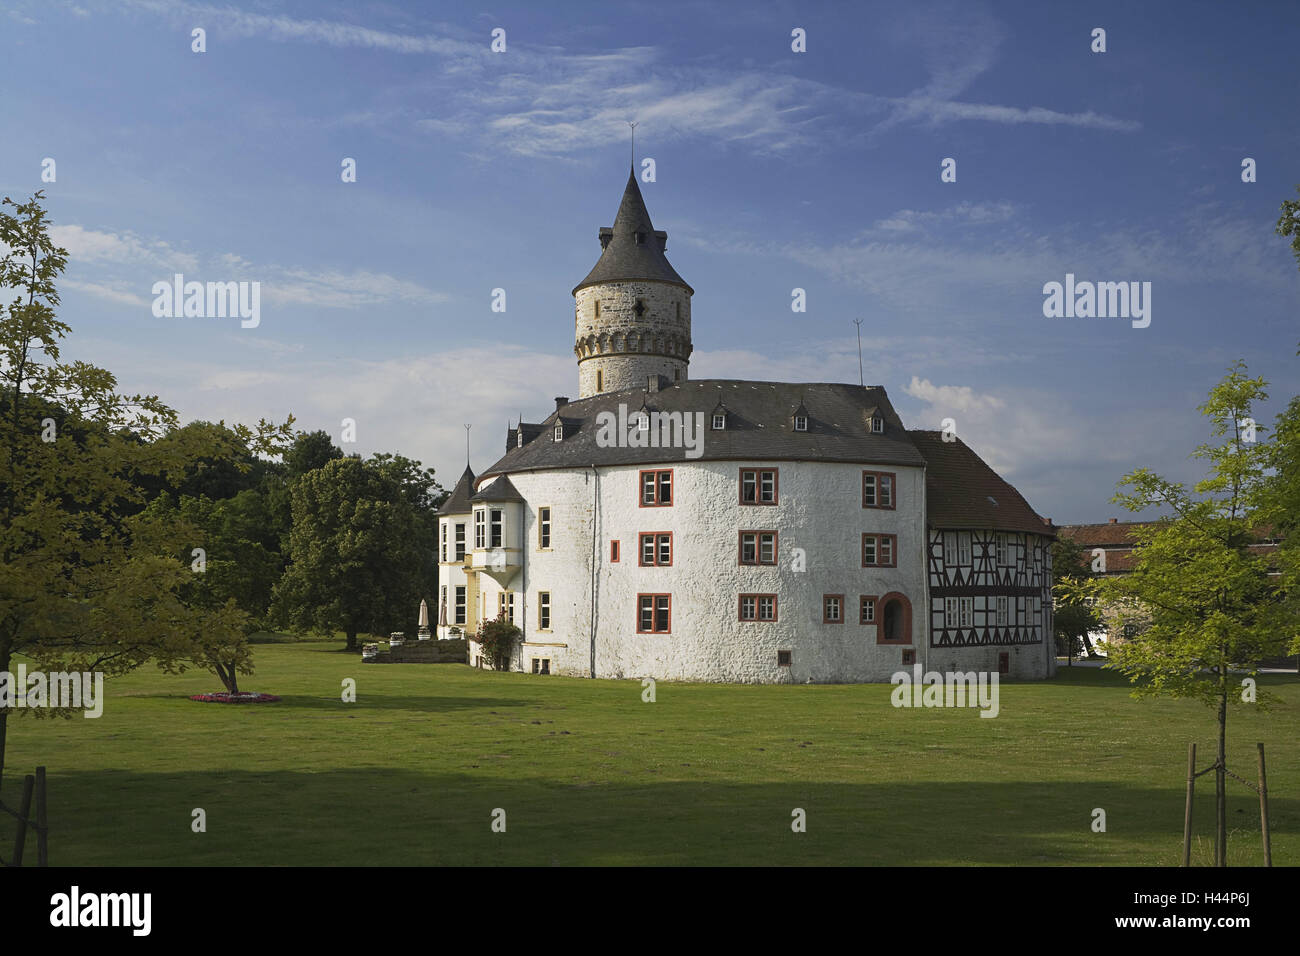 Germany, Lower Saxony, Baddeckenstedt, castle Oelber, Oelber in the white way, district, destination, place of interest, architecture, building, castle building, outside, deserted, Stock Photo